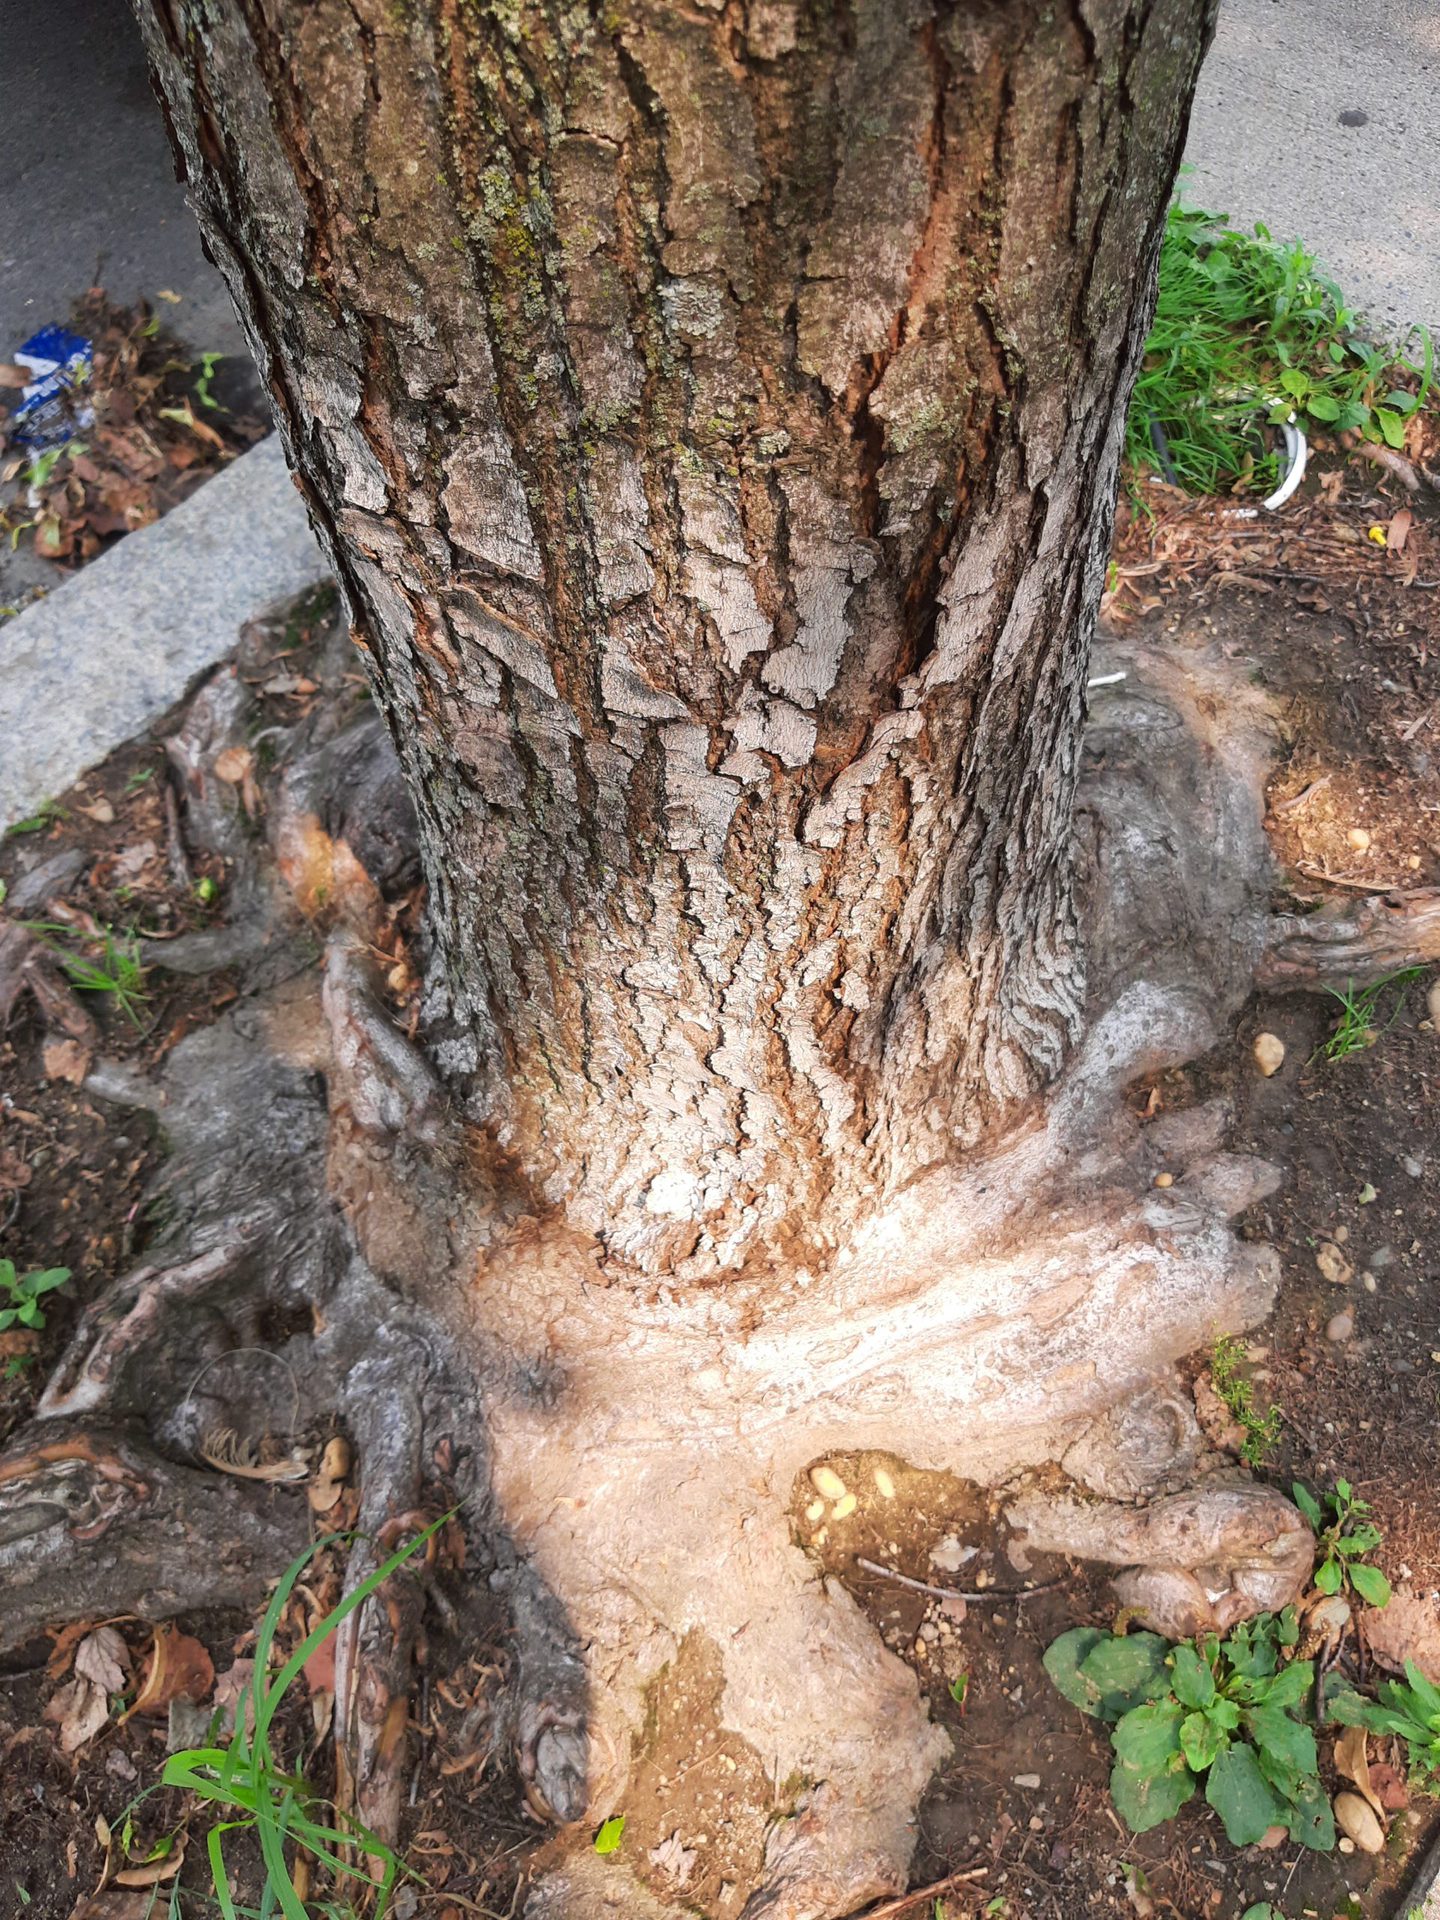 Samsung Galaxy XCover Pro Camera Samples showing a tree trunk.